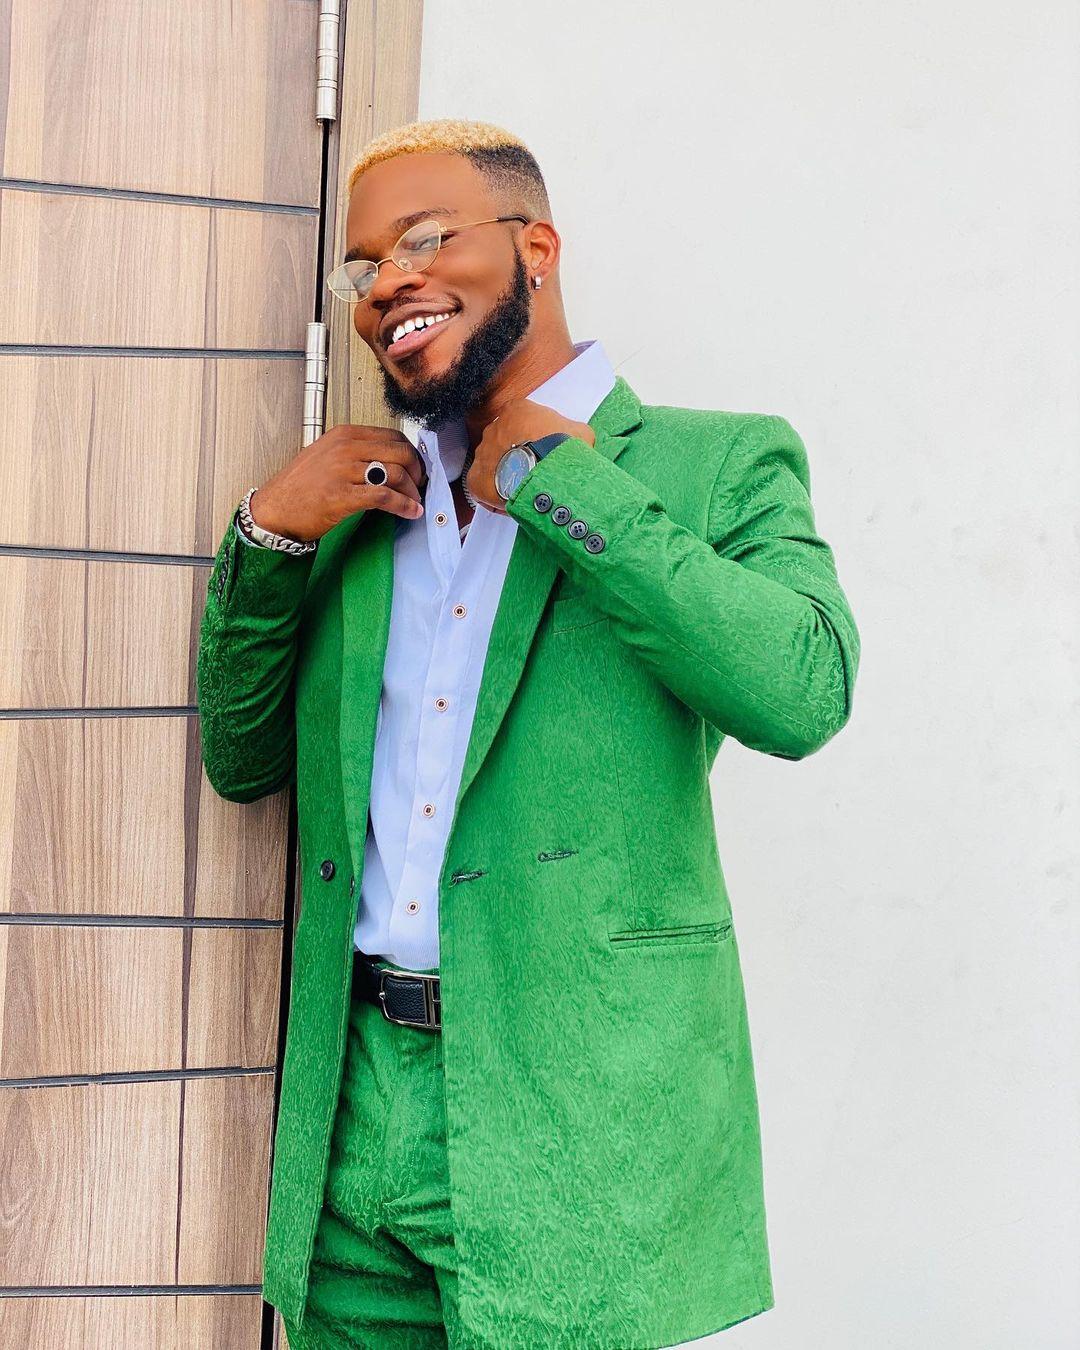 https://www.yabaleftonline.ng/comedian-brodashaggi-laments-bitterly-after-he-was-extorted-by-touts-who-damaged-his-car-in-lekki-lagos-video/